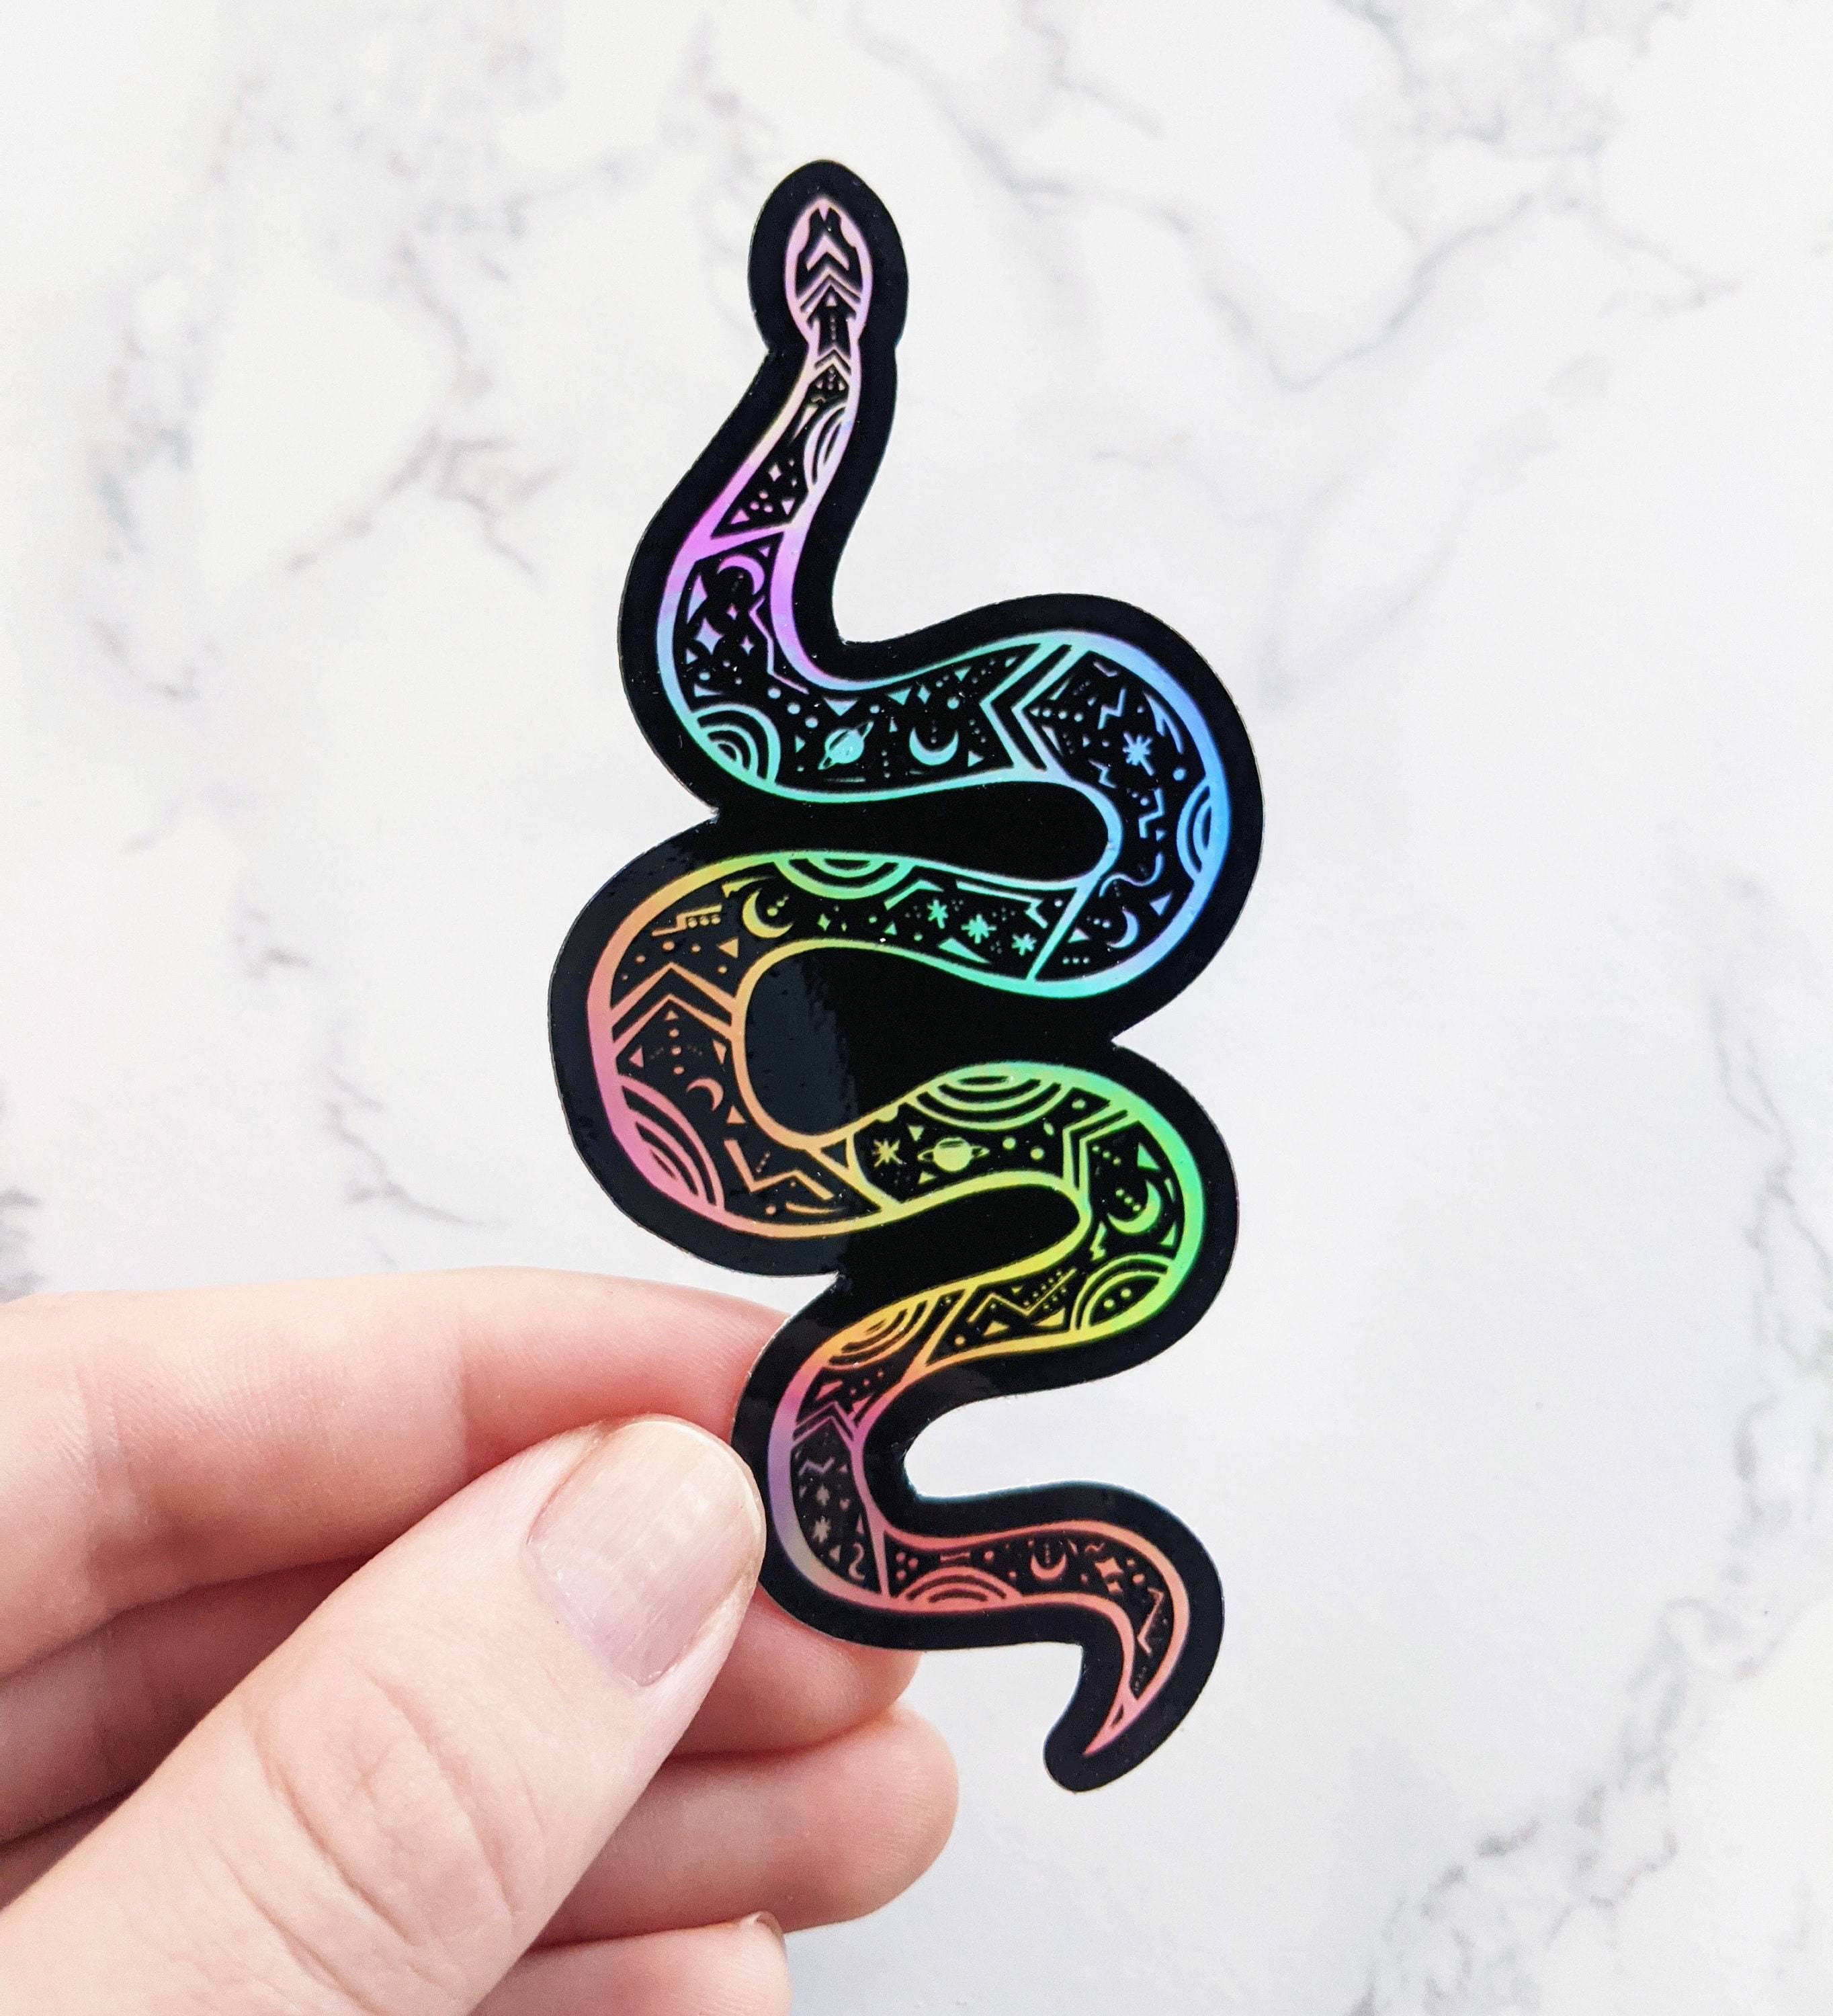 Snake Tattoo Meaning (With Examples) - Parade